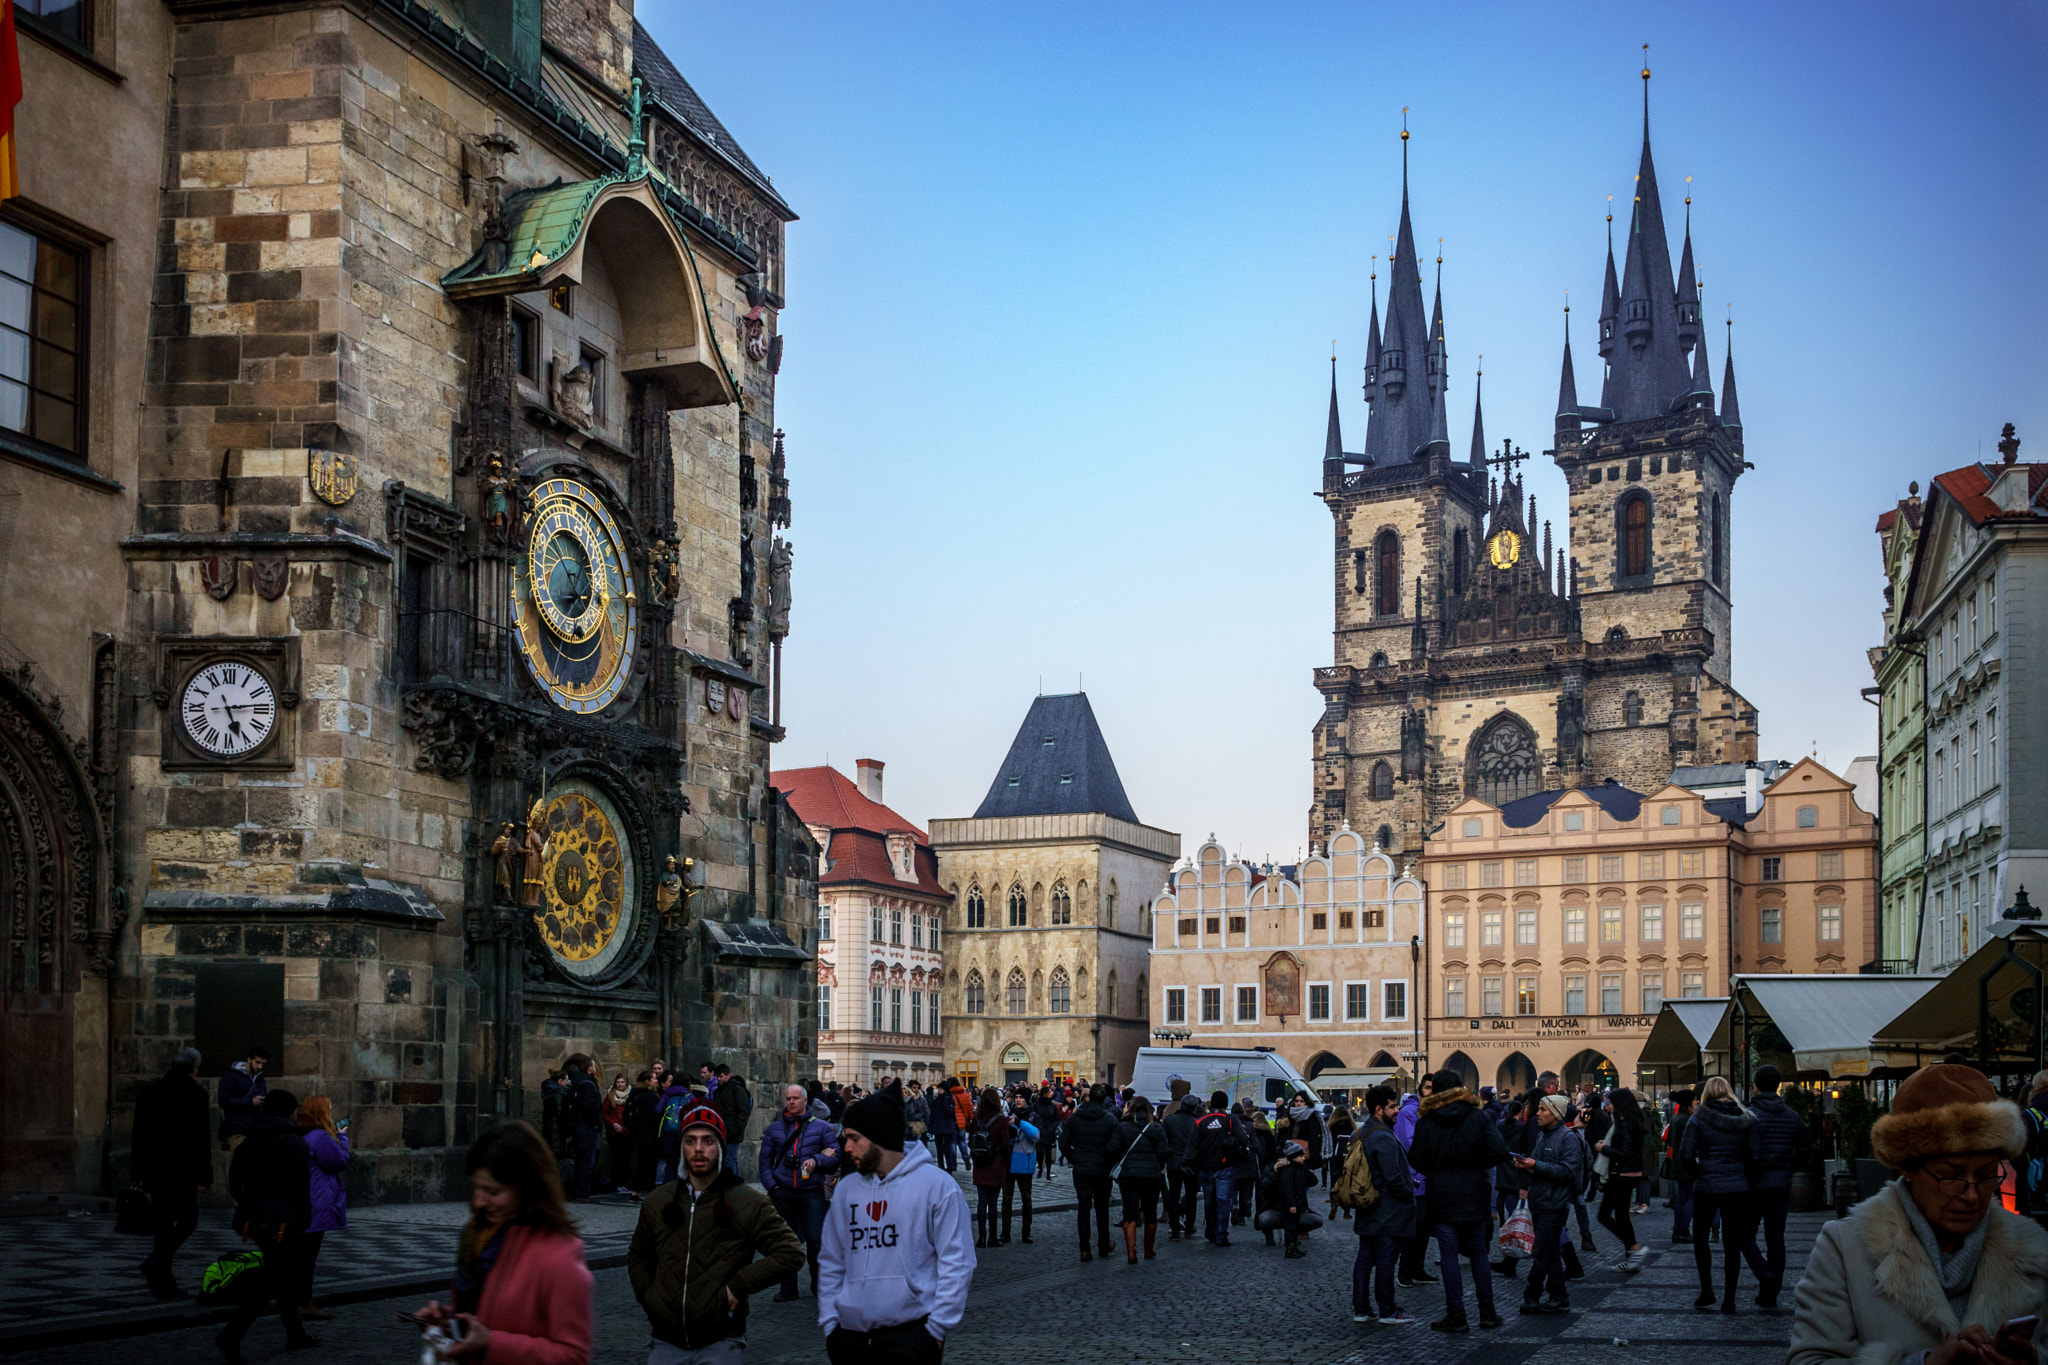 Sony a6000 sample photo. Prague astronomical clock and church of our lady before týn photography